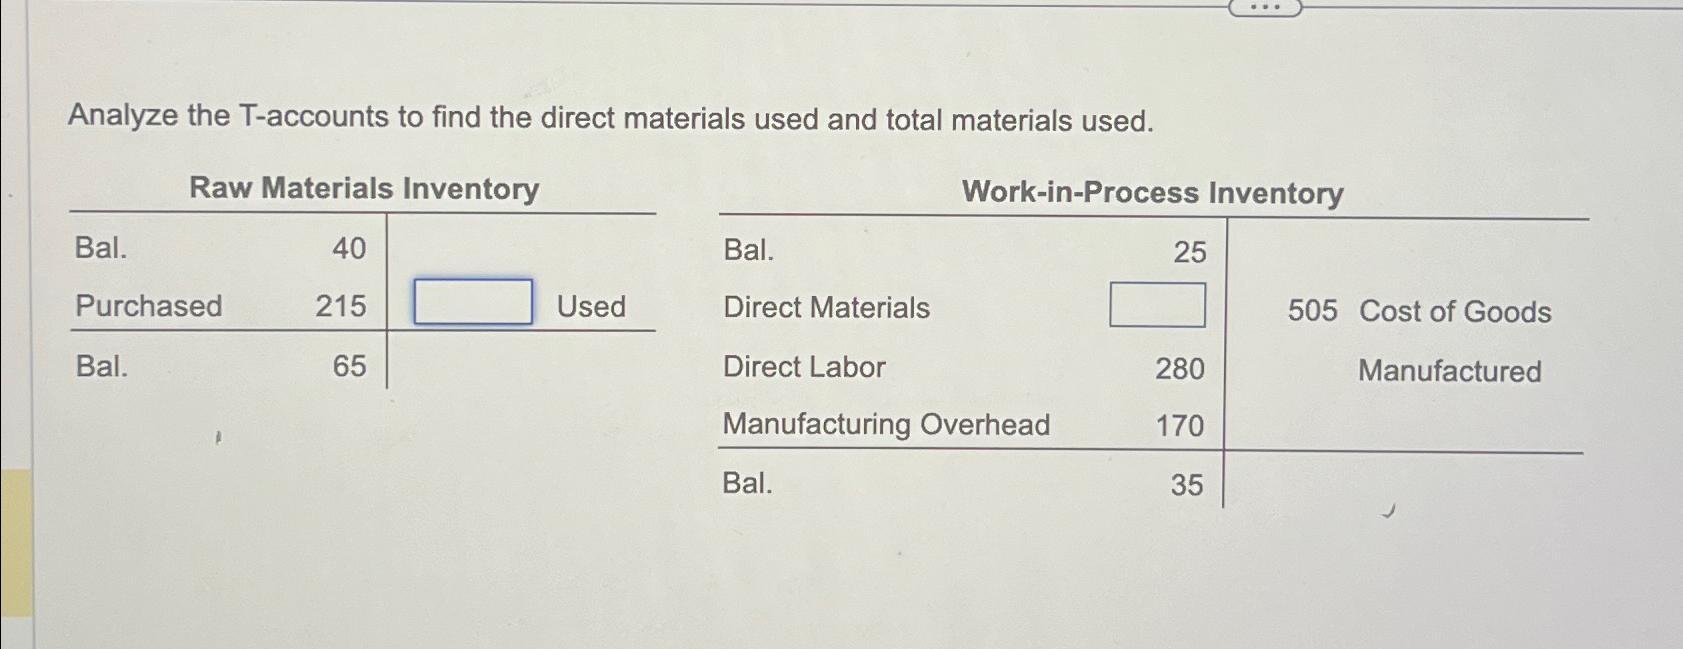 Analyze the T-accounts to find the direct materials used and total materials used. Raw Materials Inventory 40